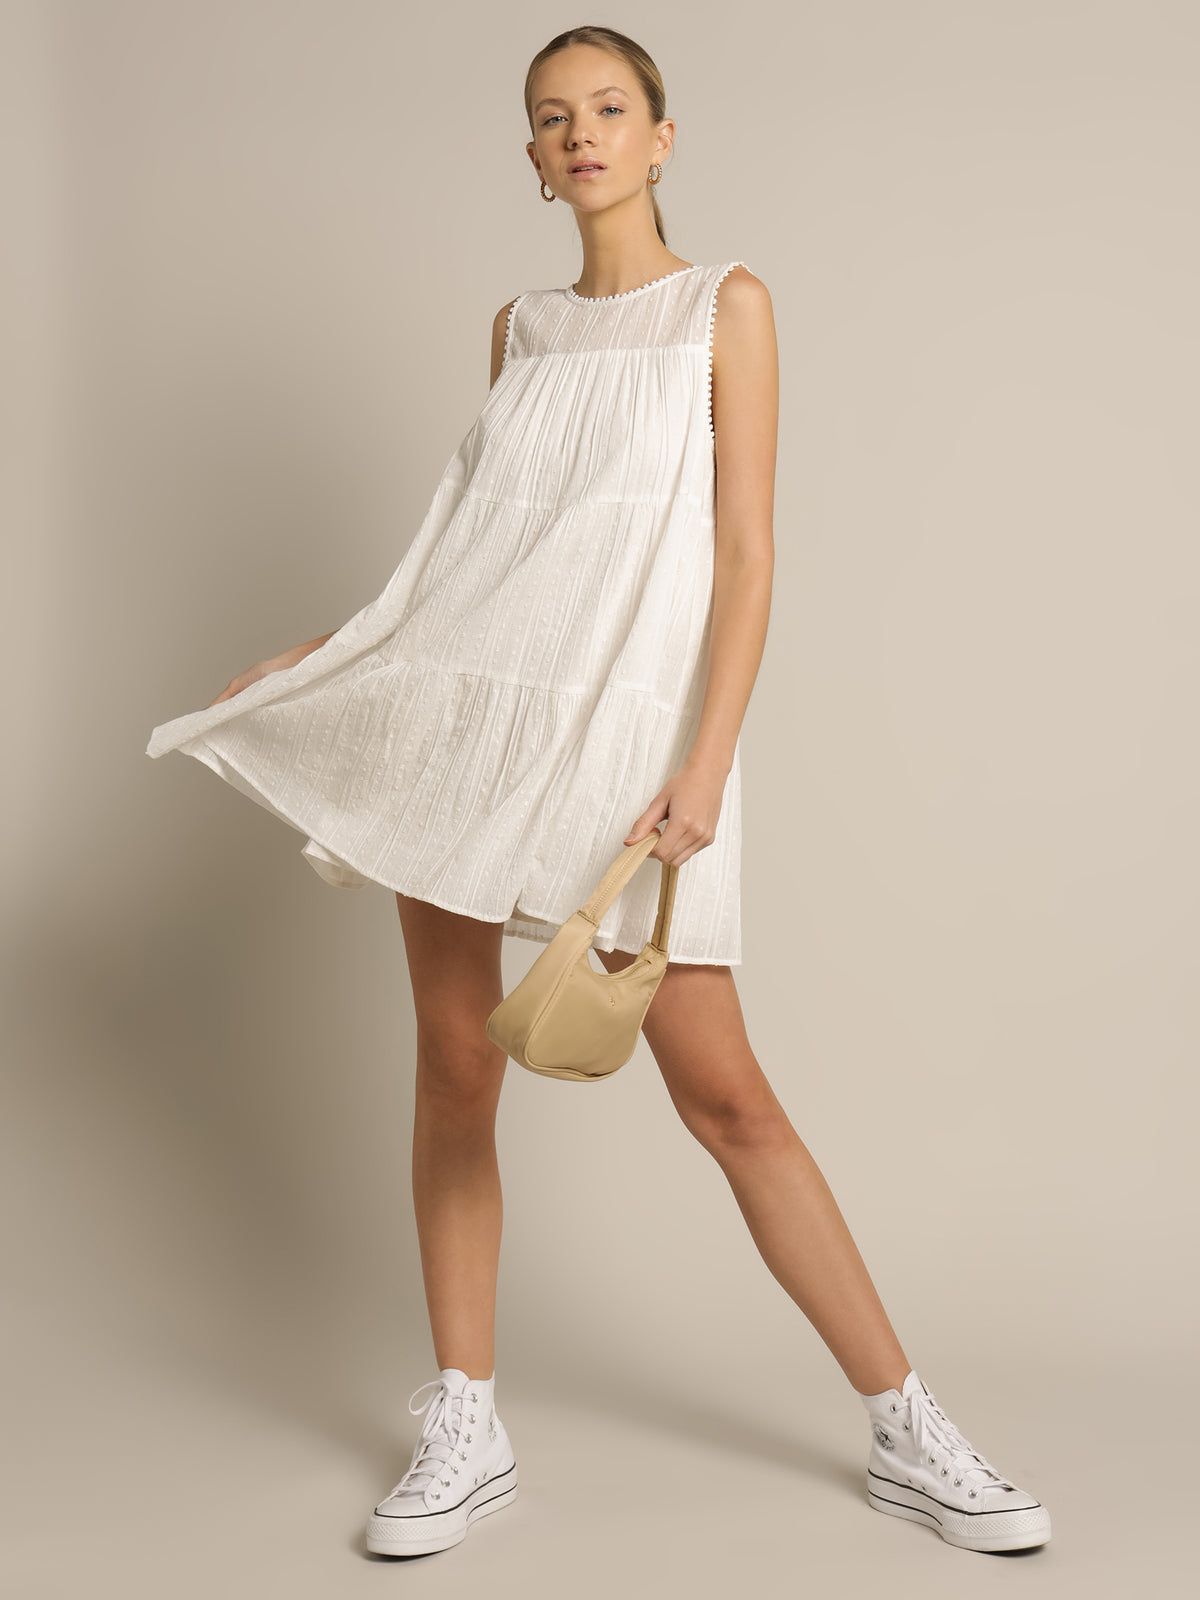 Railey Broderie Dress in White